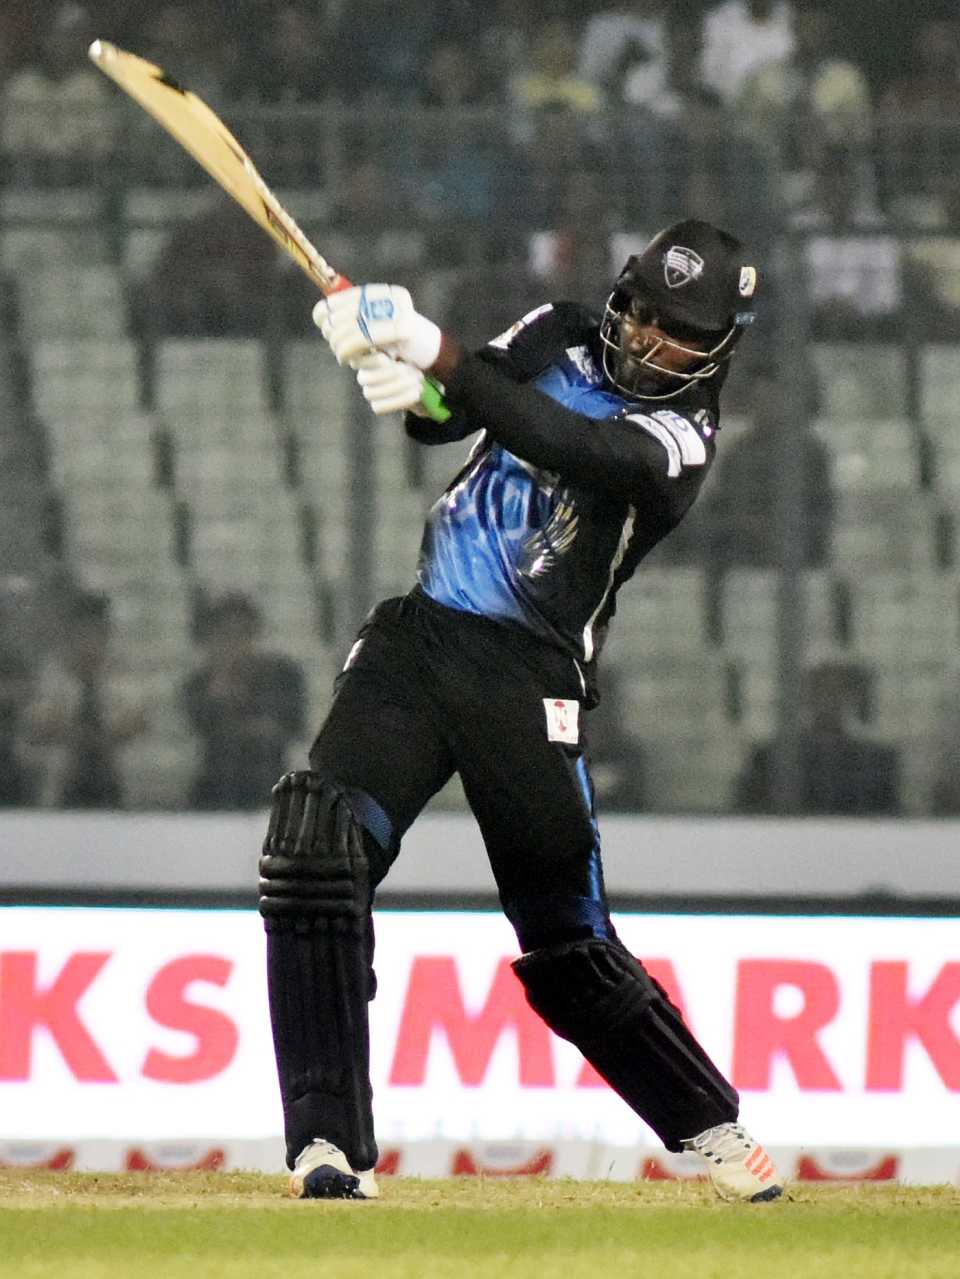 Chris Gayle launches into a big shot